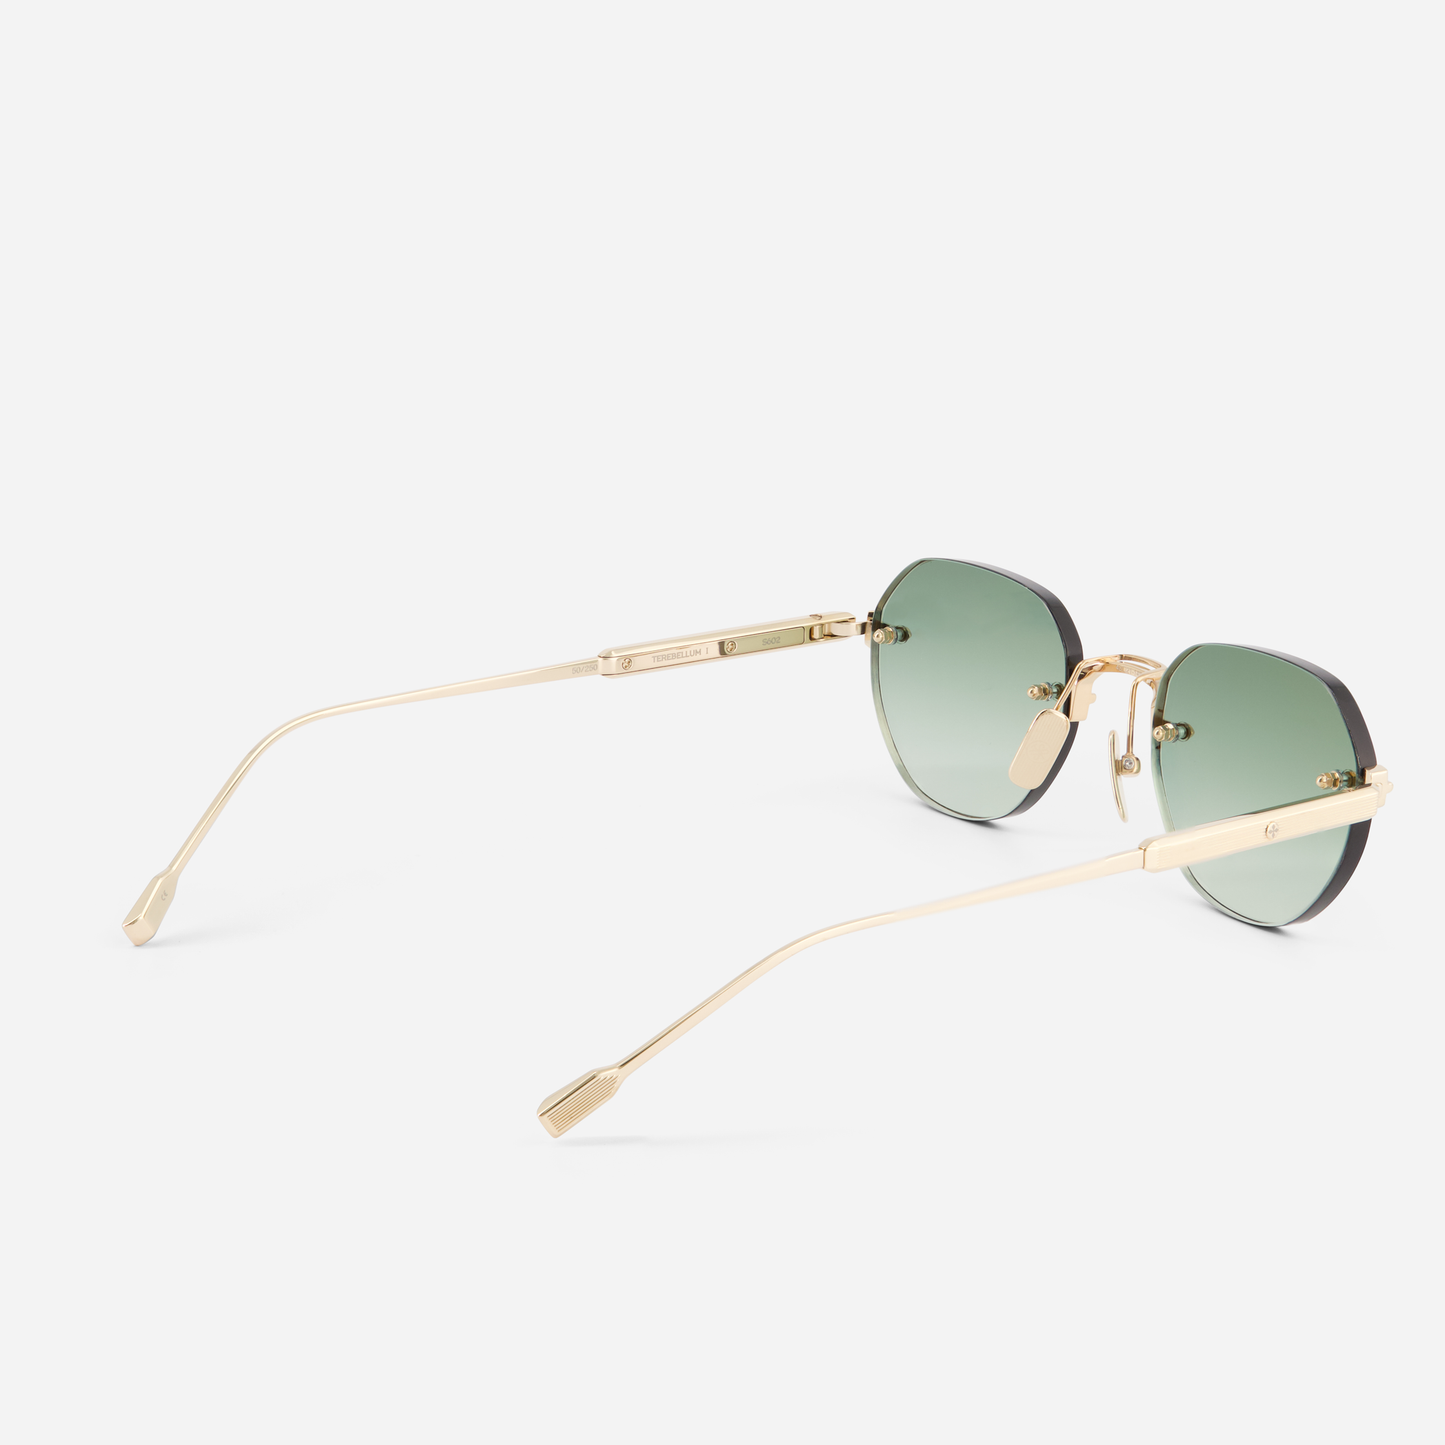 Terebellum I S602 Rimless sunglasses with Lunar Gold and green lenses